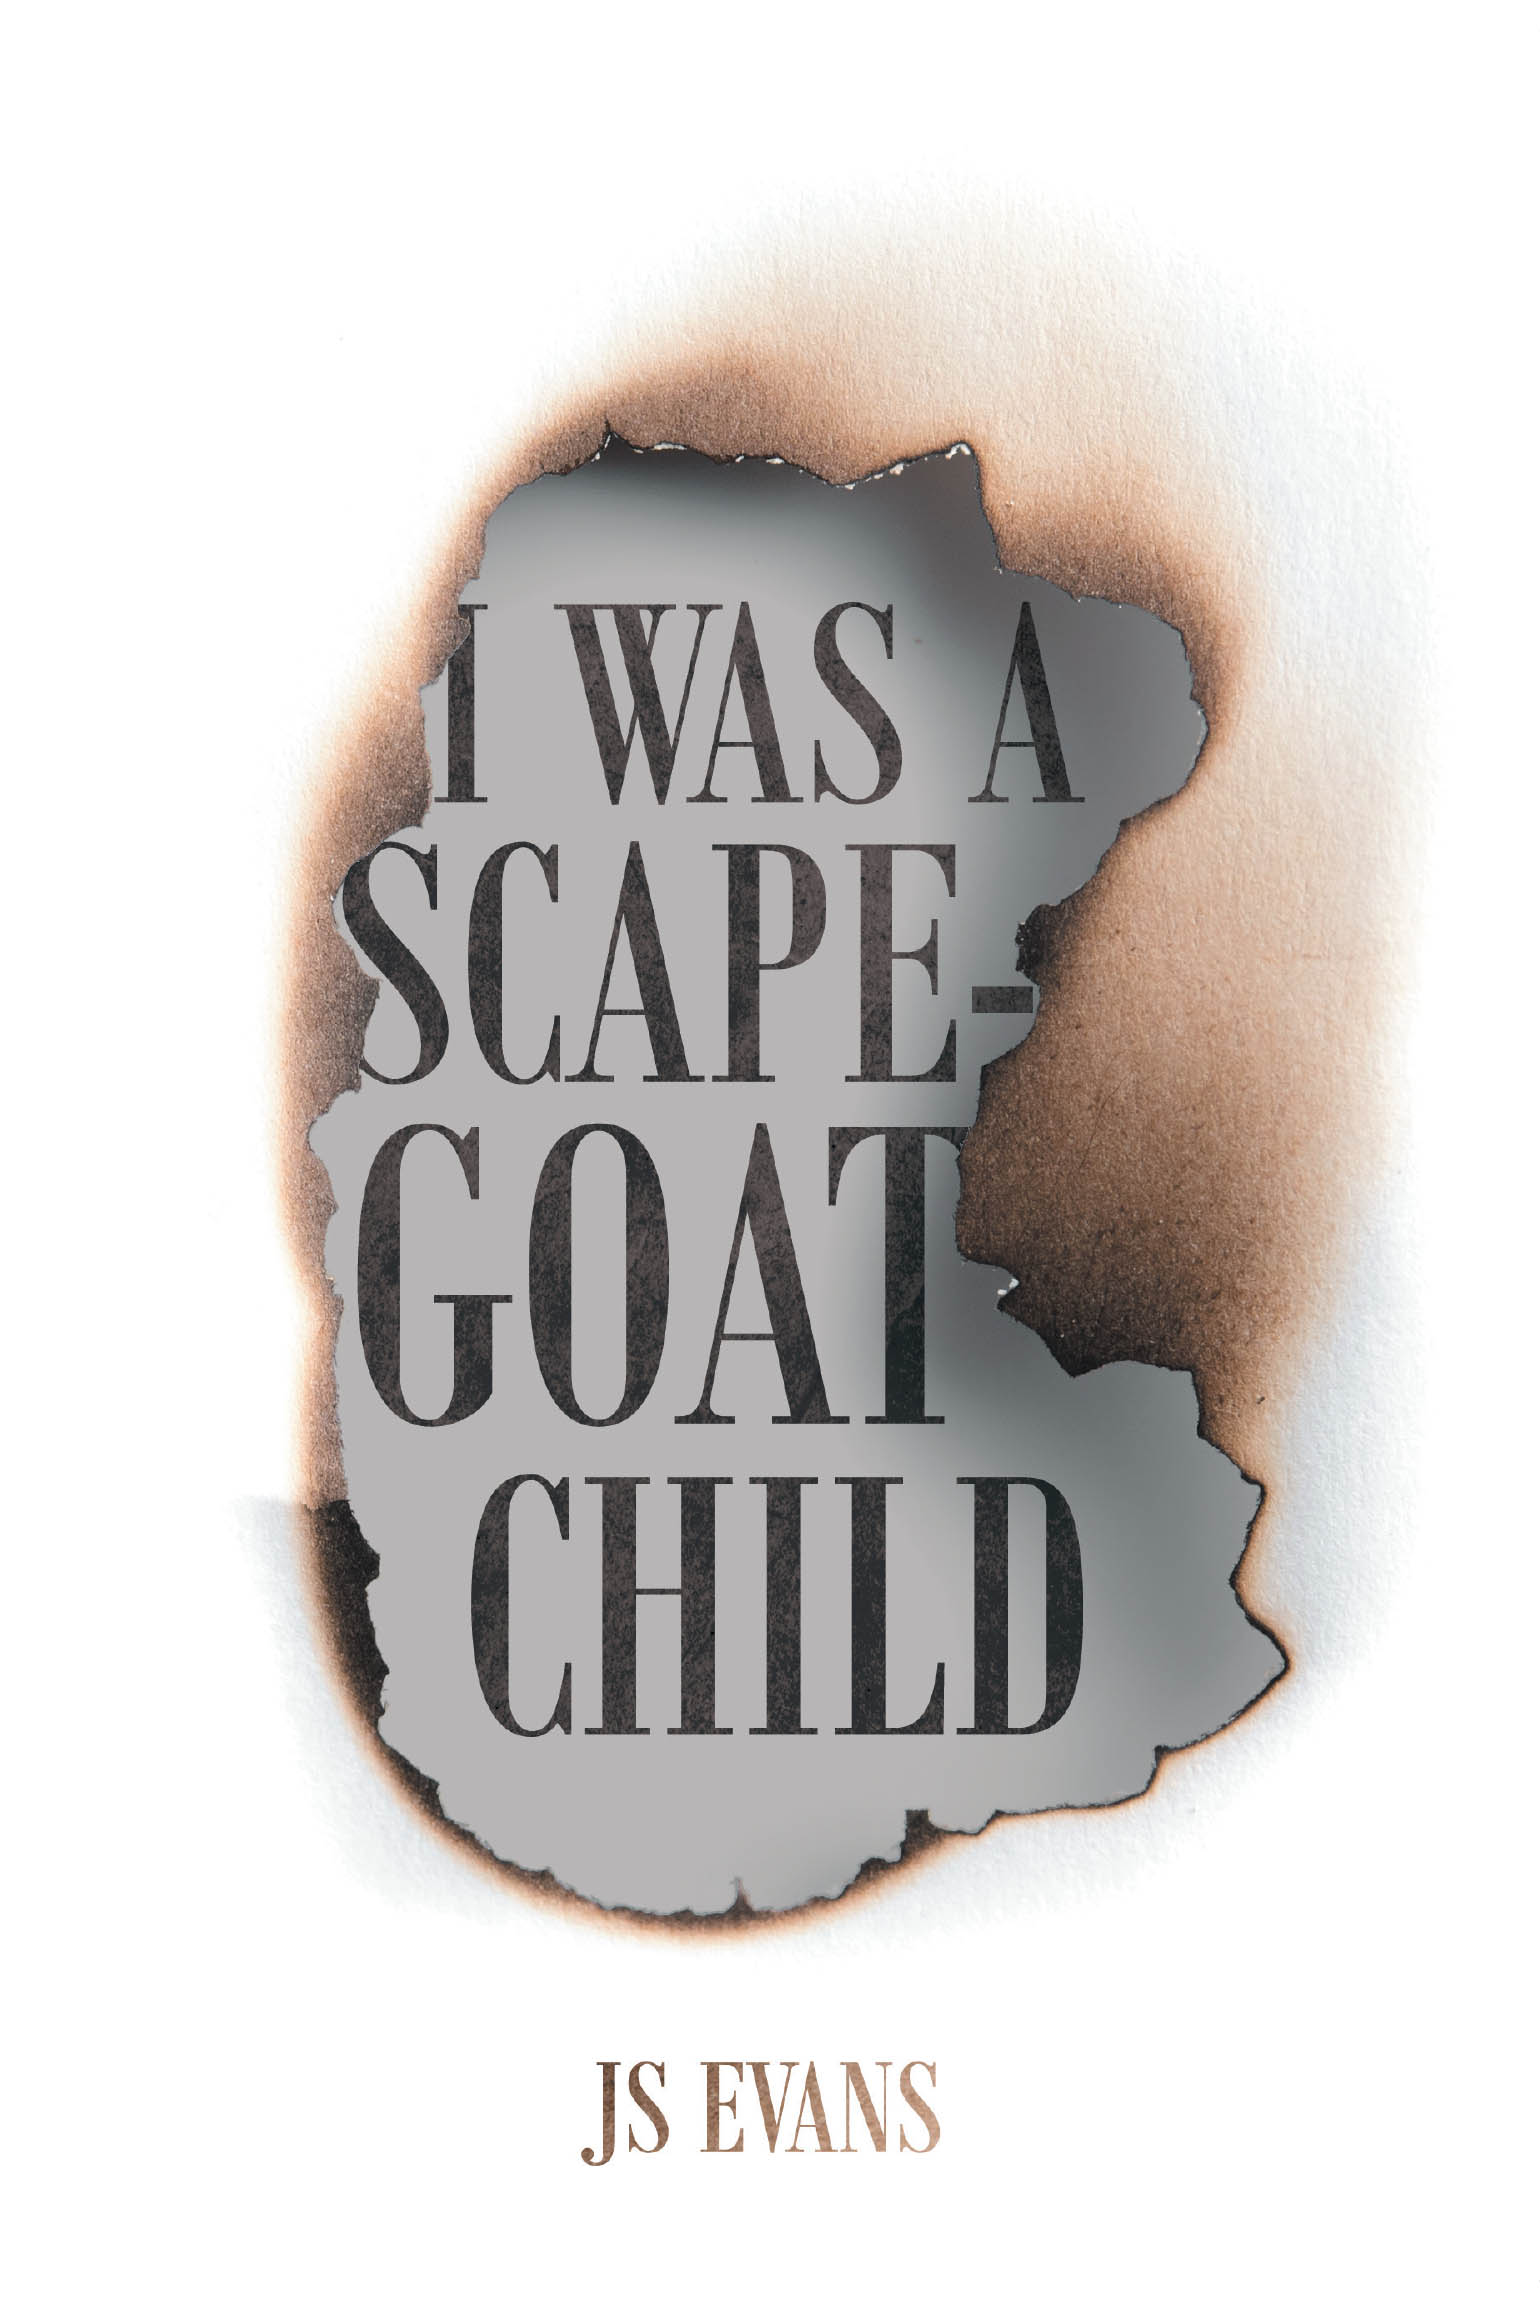 i-was-a-scapegoat-child